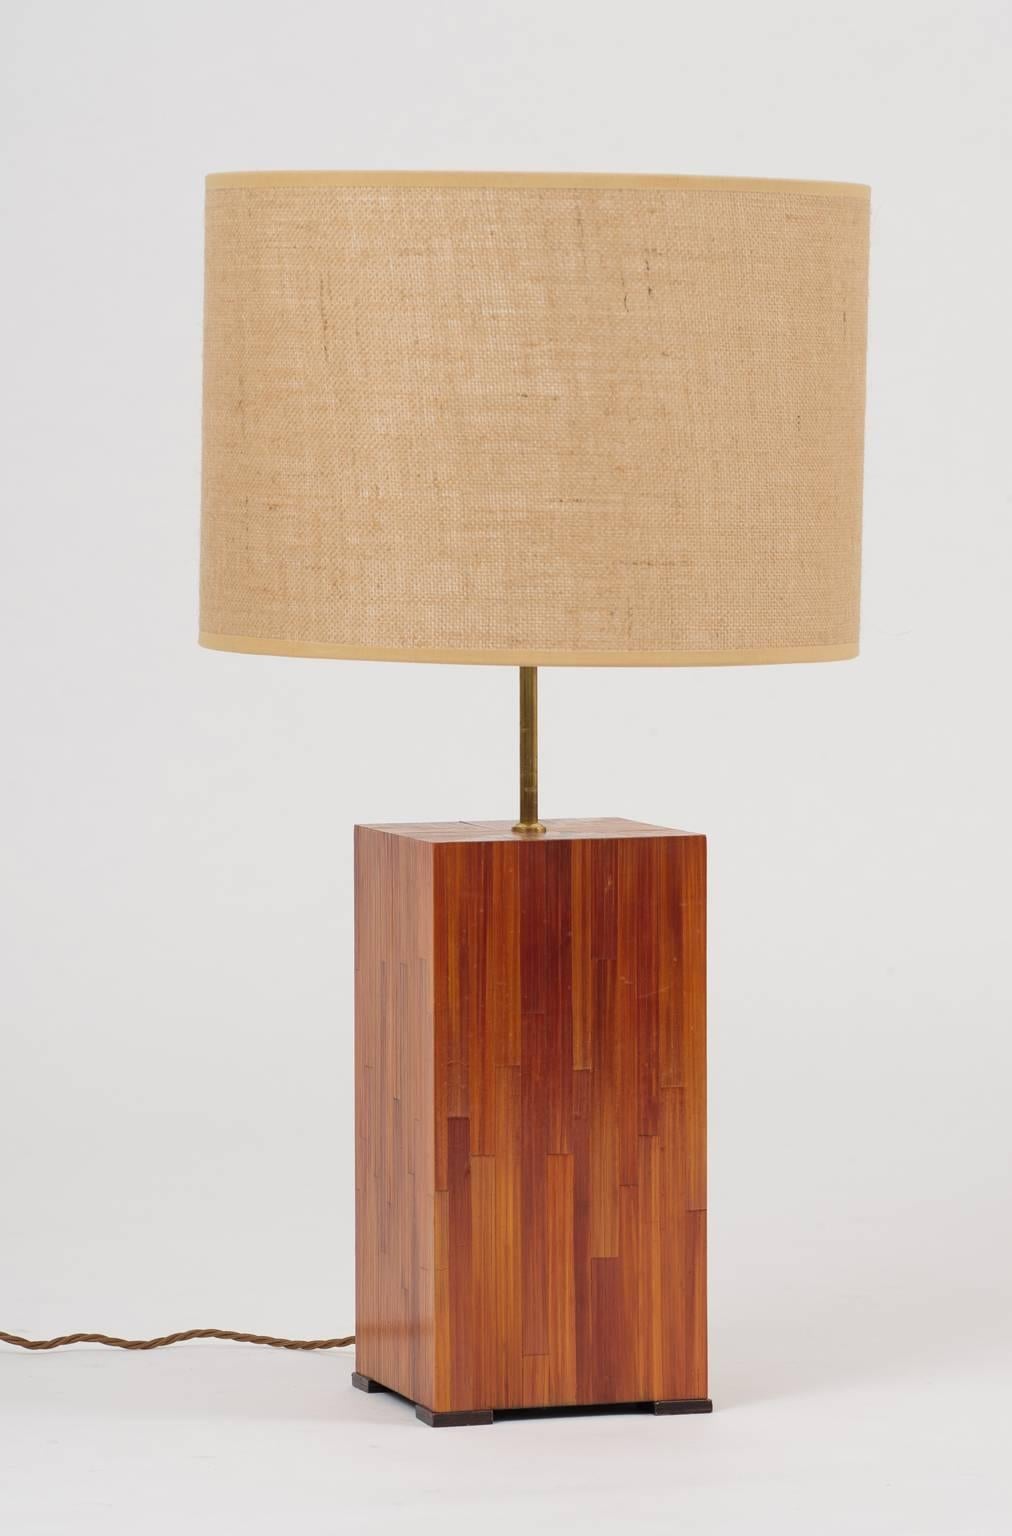 A straw marquetry square lamp, on darker straw square feet, the bras stem supporting a bespoke hessian drum shade
France, third quarter of the 20th century.